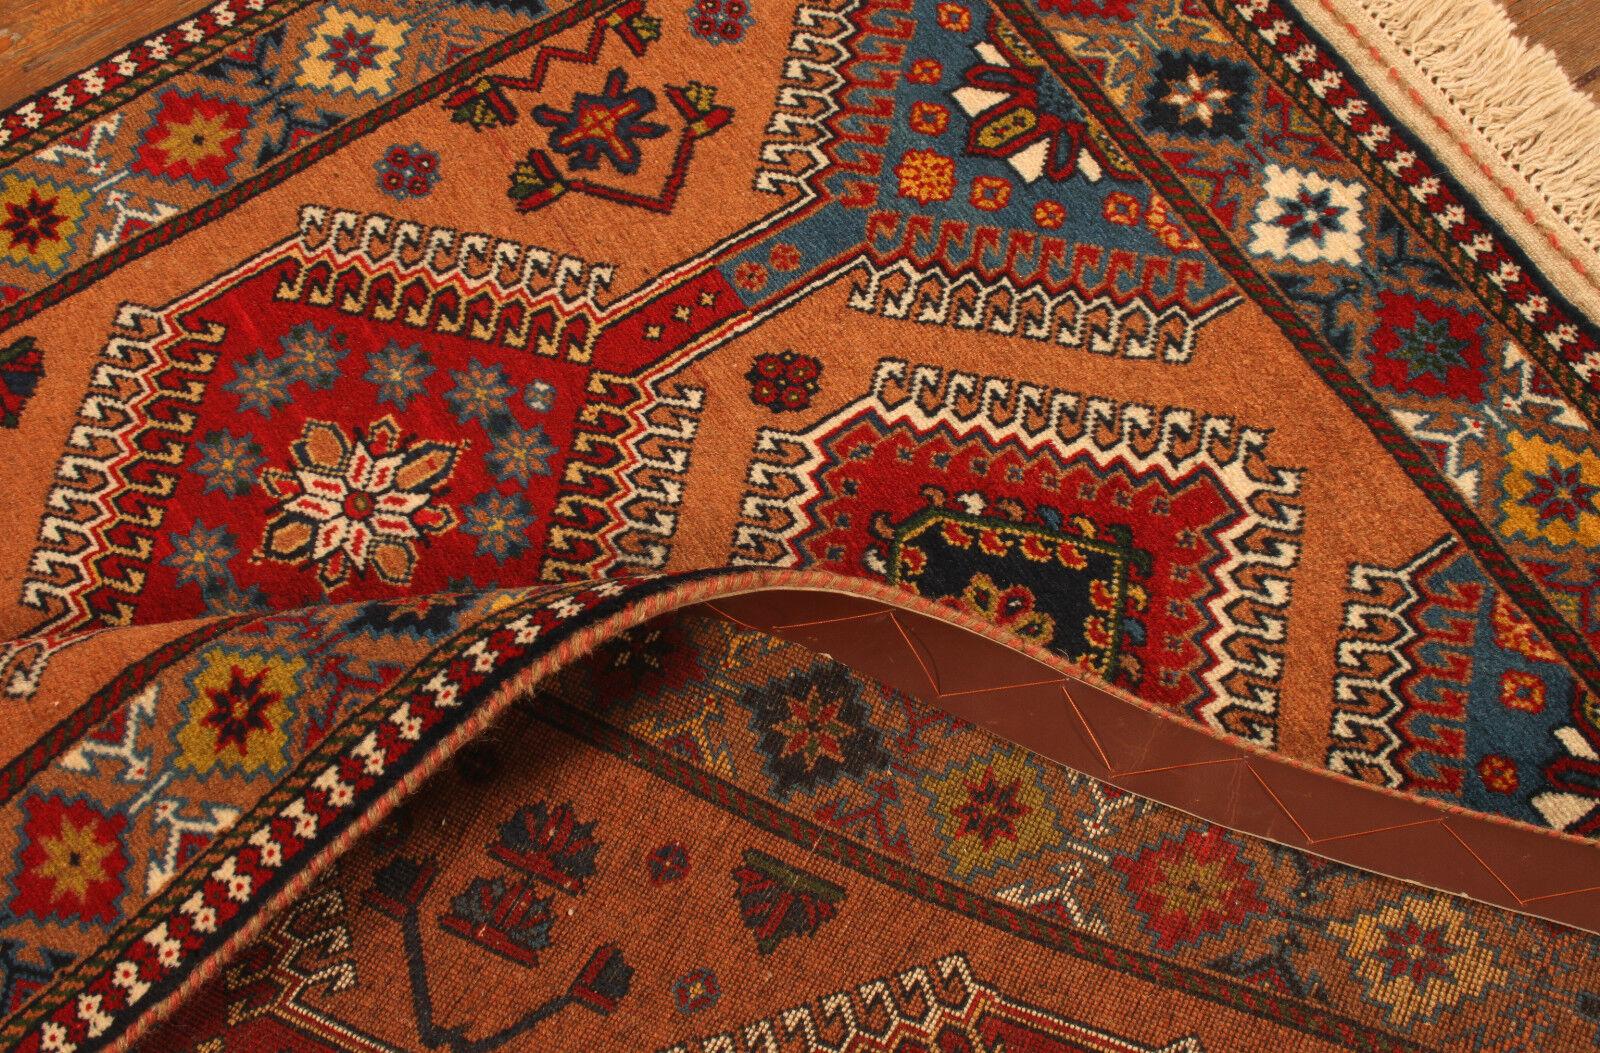 Late 20th Century Handmade Vintage Persian Style Yalameh Rug 3.4' x 4.7', 1990s - 1T17 For Sale